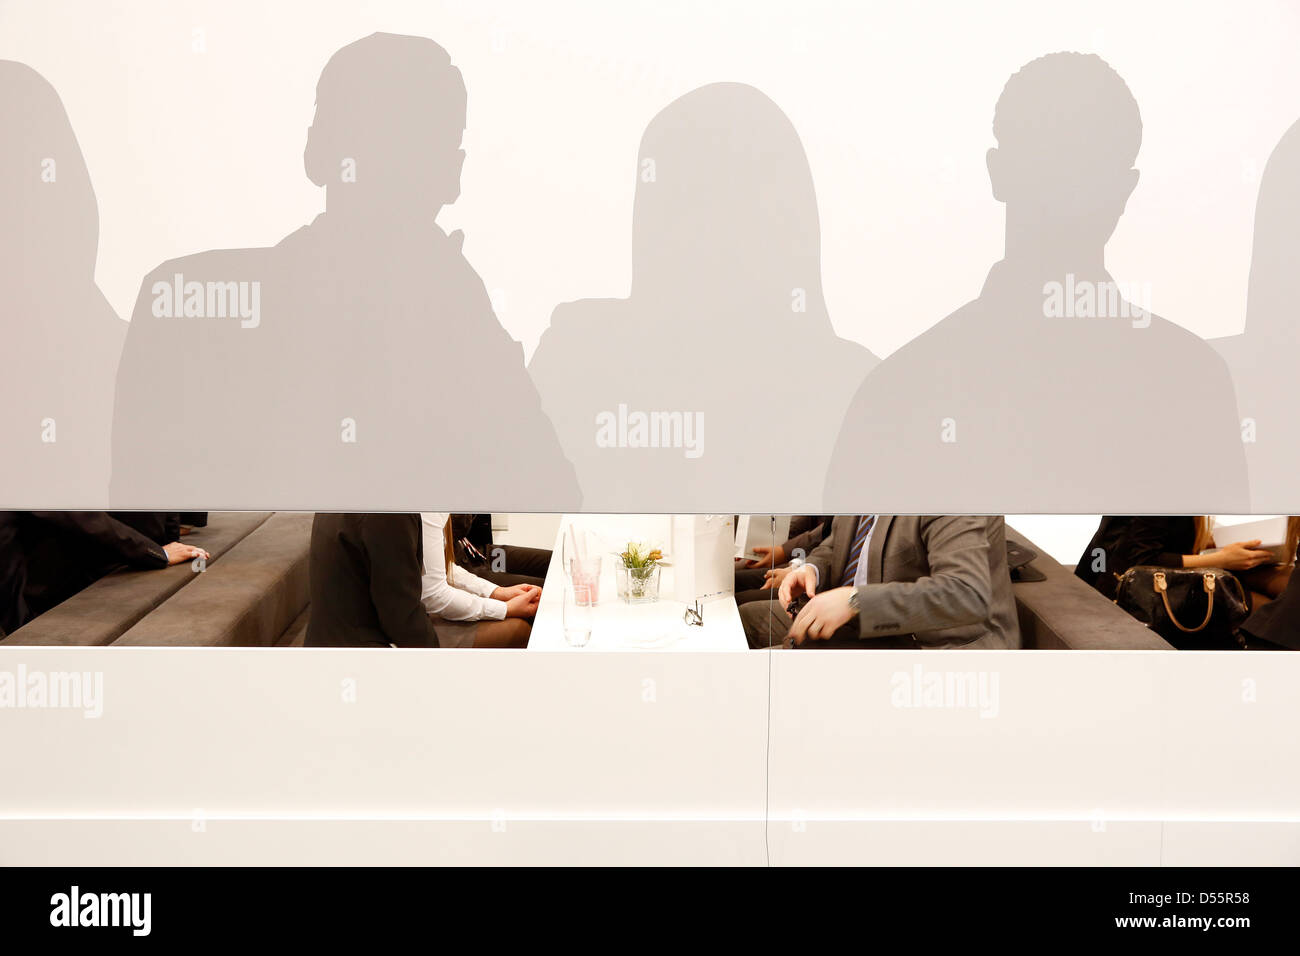 Essen, Germany, managers talk behind a shadow wall Stock Photo